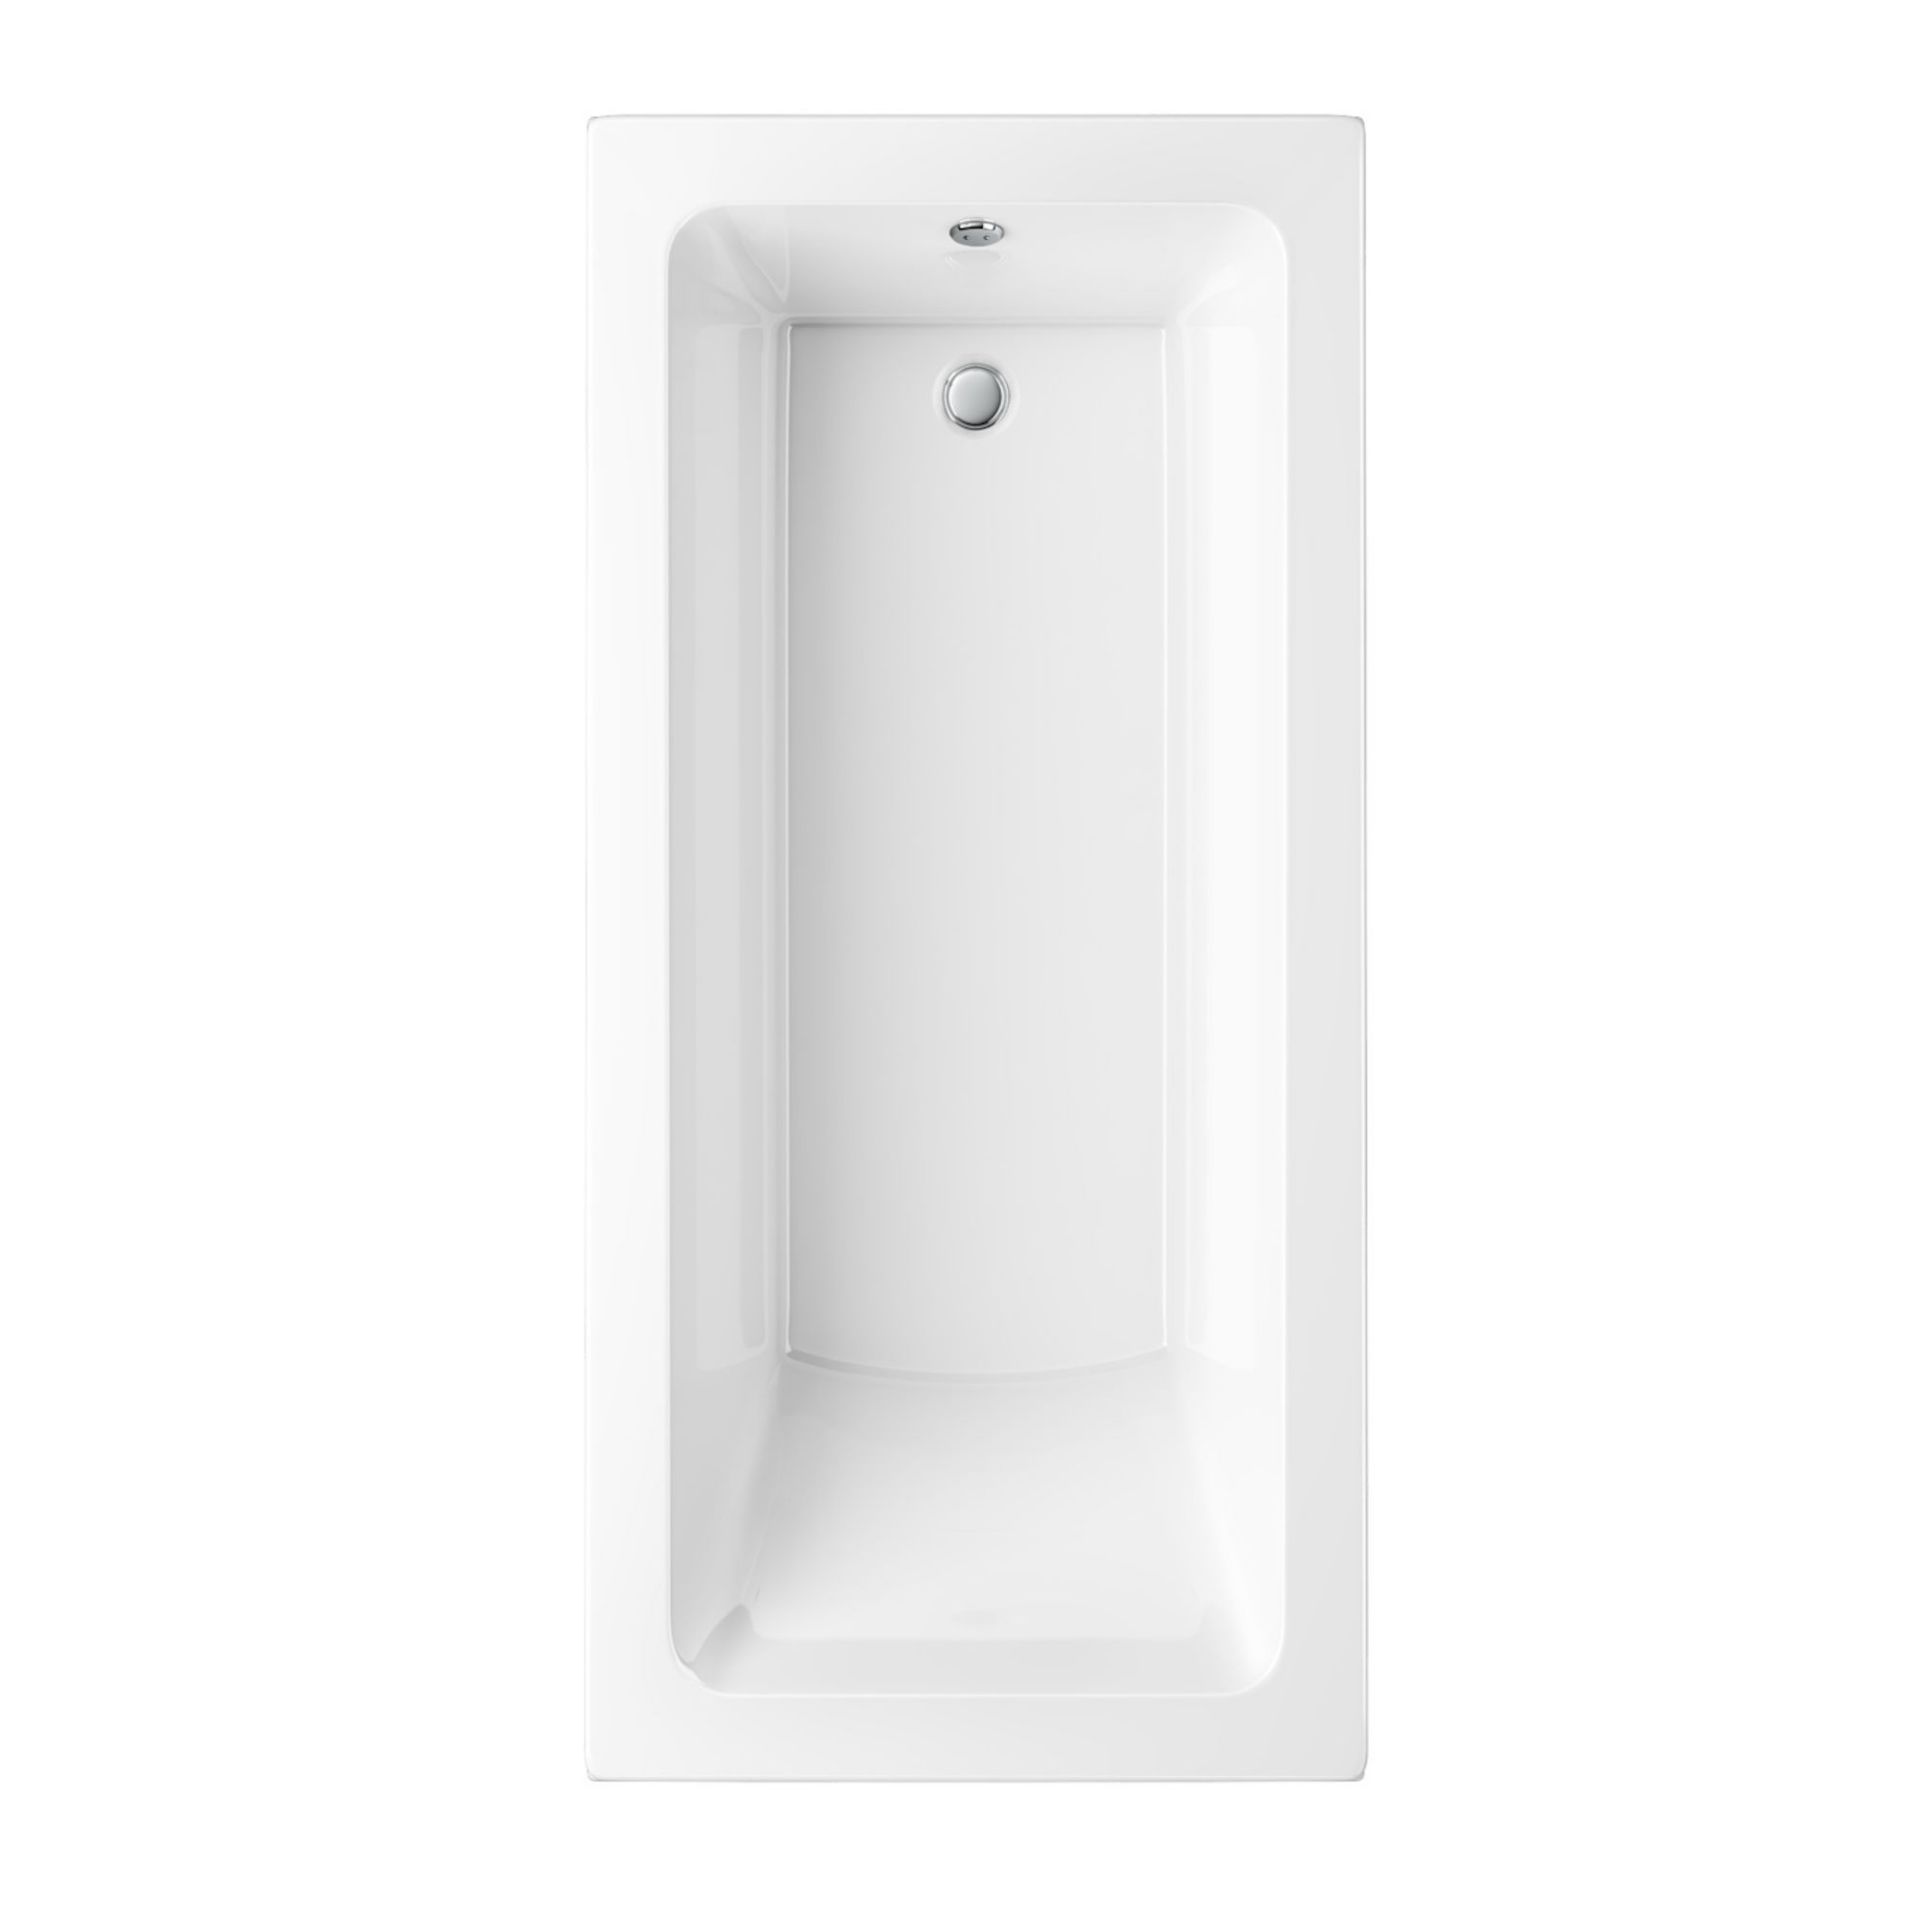 New (D4) 1800x800mm Square Single Ended Bath. RRP £379.99. Manufactured In The UK. Sanitar... - Image 2 of 2